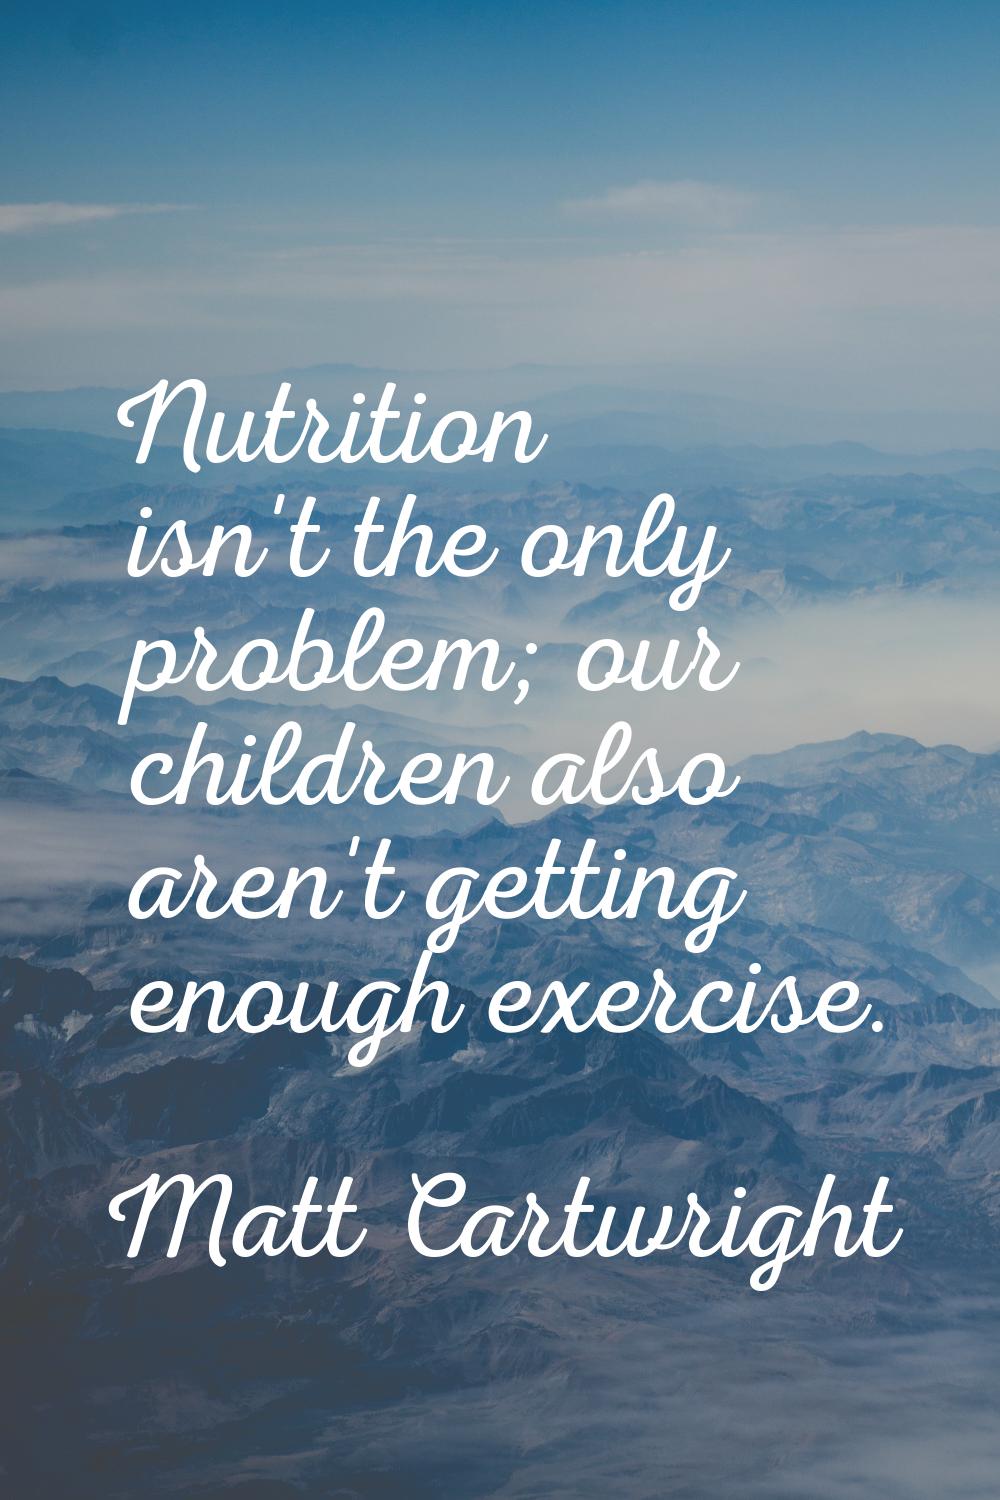 Nutrition isn't the only problem; our children also aren't getting enough exercise.